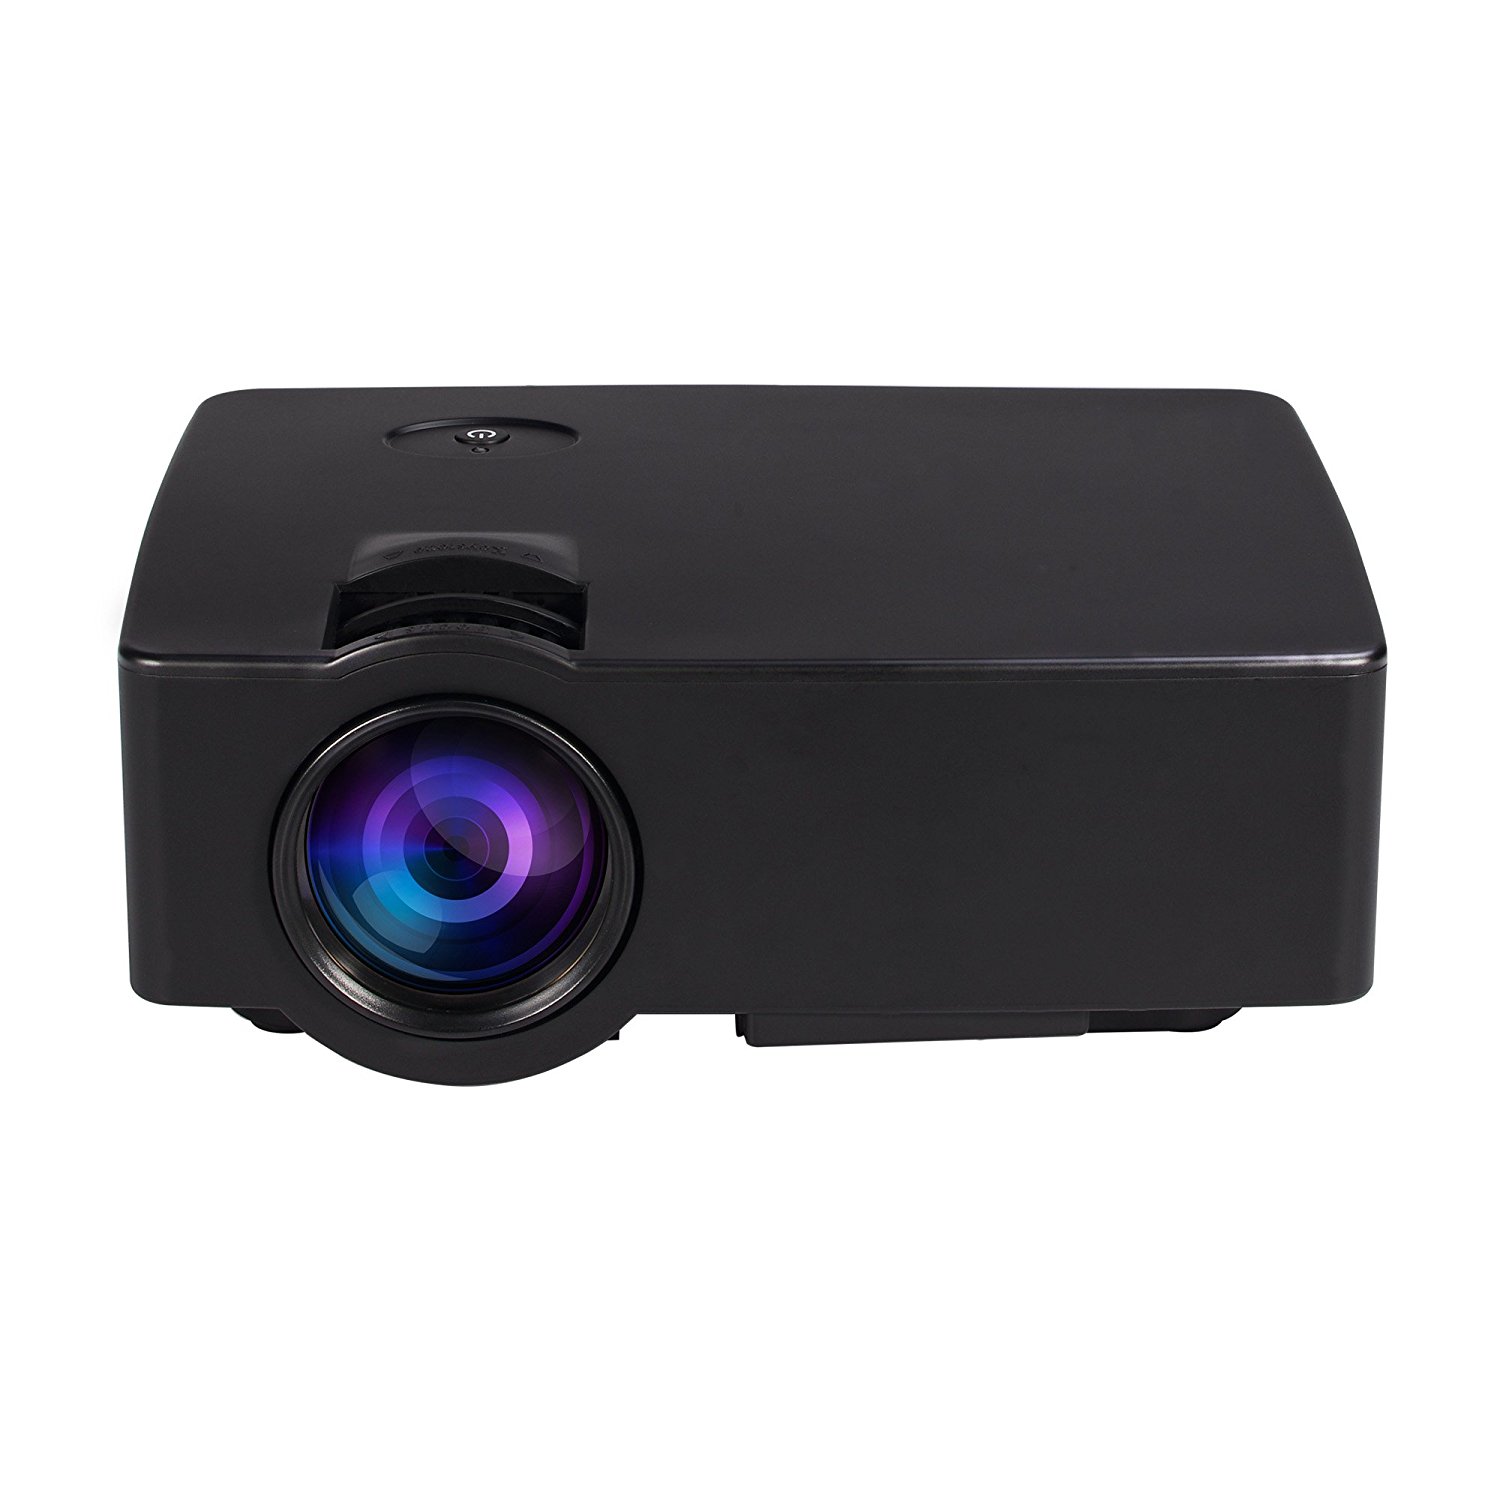 STOGA E8 Video Projector Portable 1080P LED Video Projector 120 Lumens For Home Cinema And Office Projector